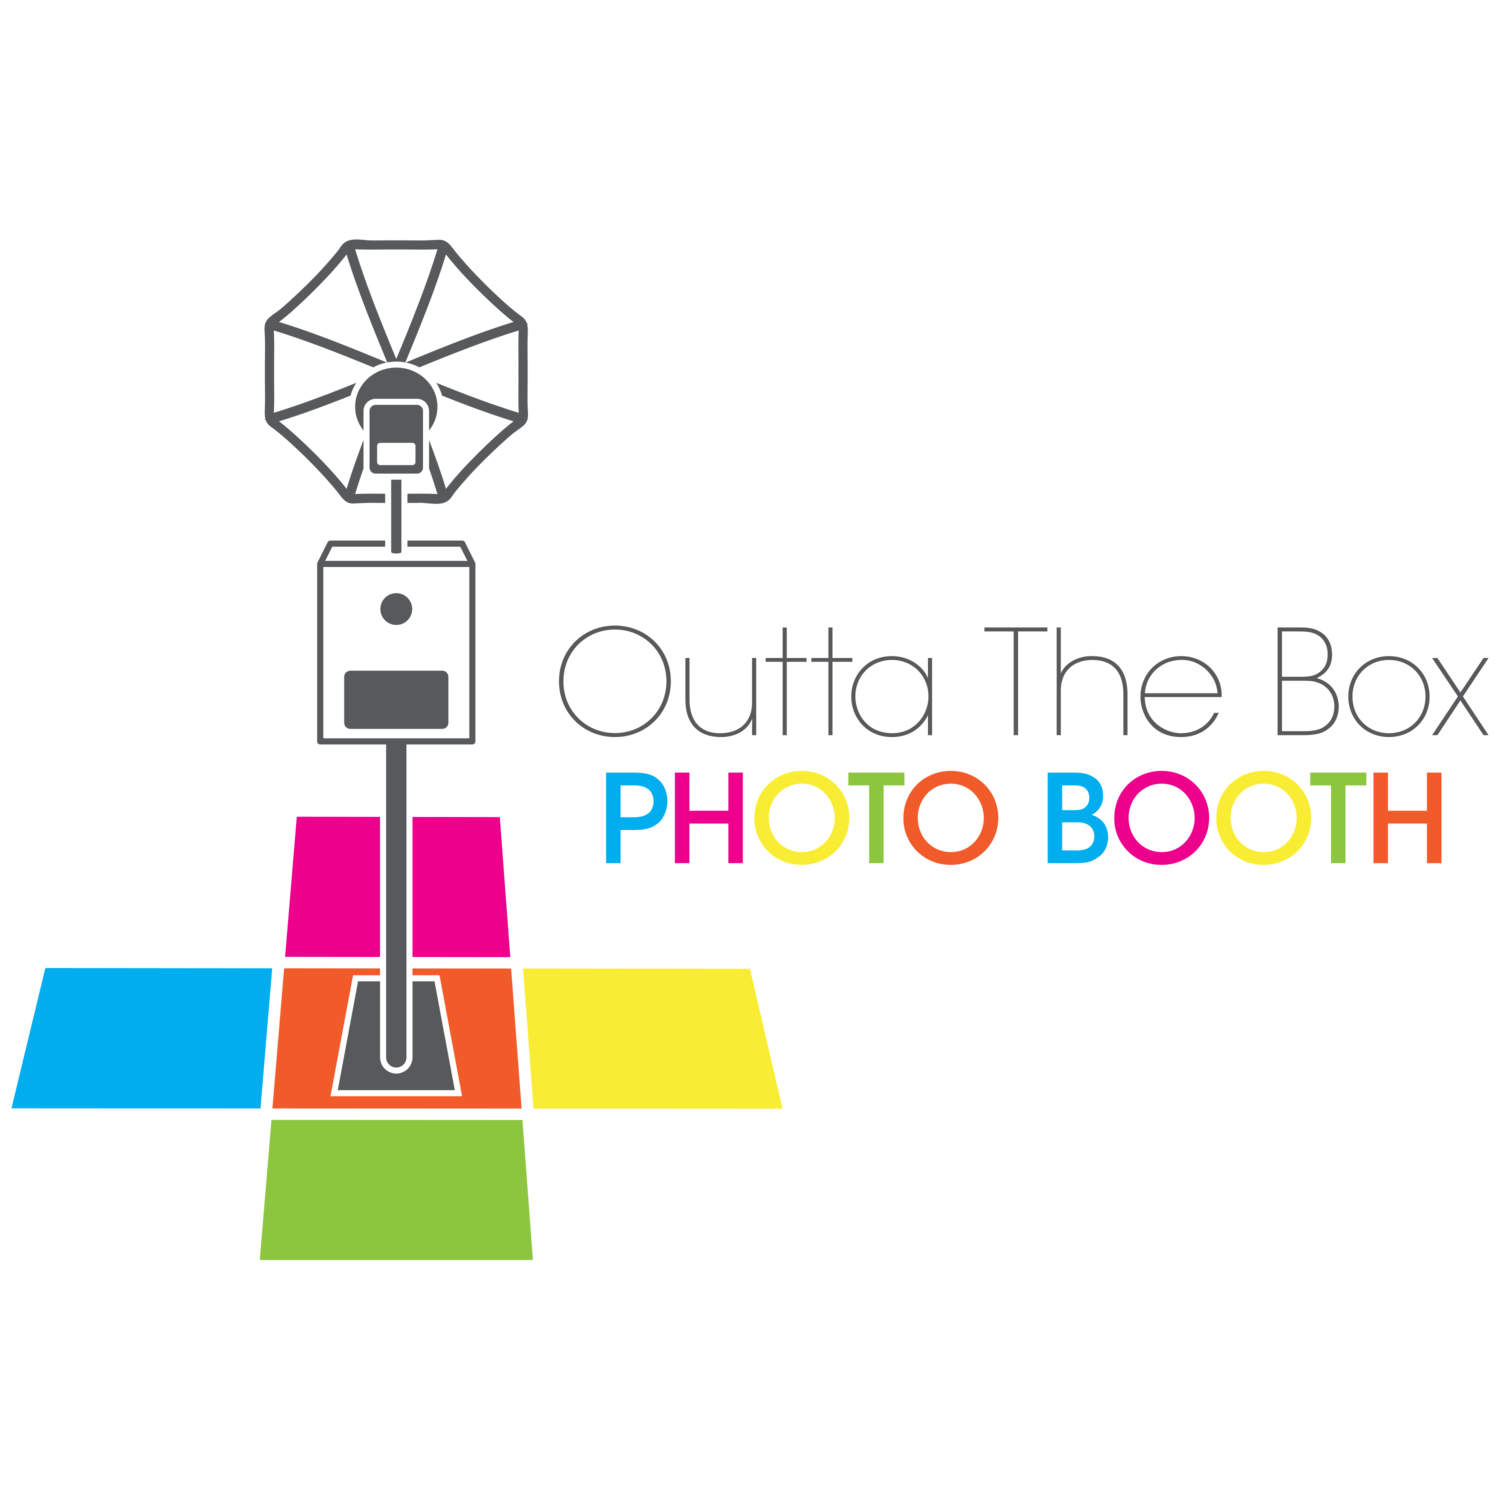 Outta The Box Photo Booth